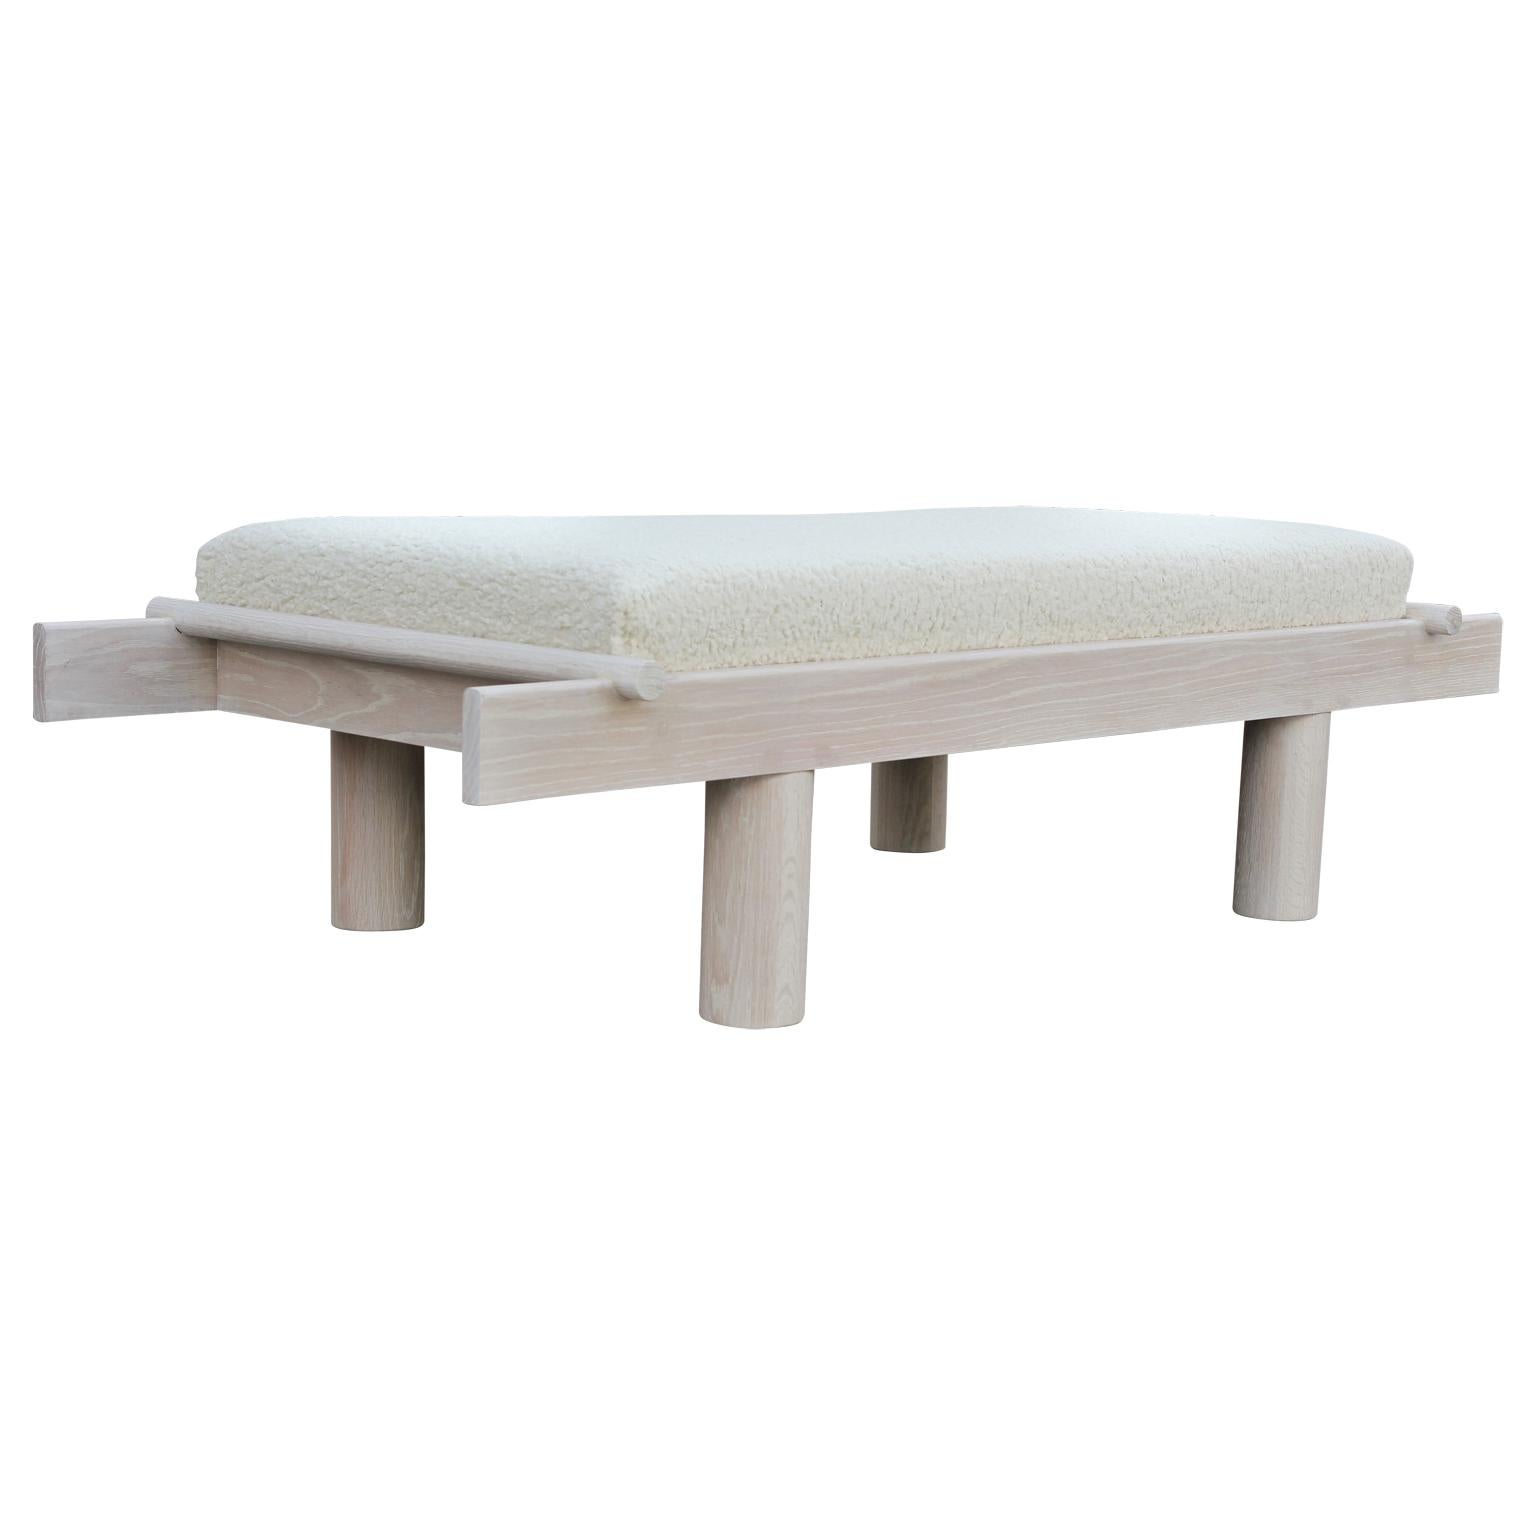 Custom modernist bench with a unique sculptural Postmodern design. The bench is made from natural cerused oak and the cushion is upholstered in a white shearling fabric. Made in Houston, TX by Reeves Design + Art local craftsman team.